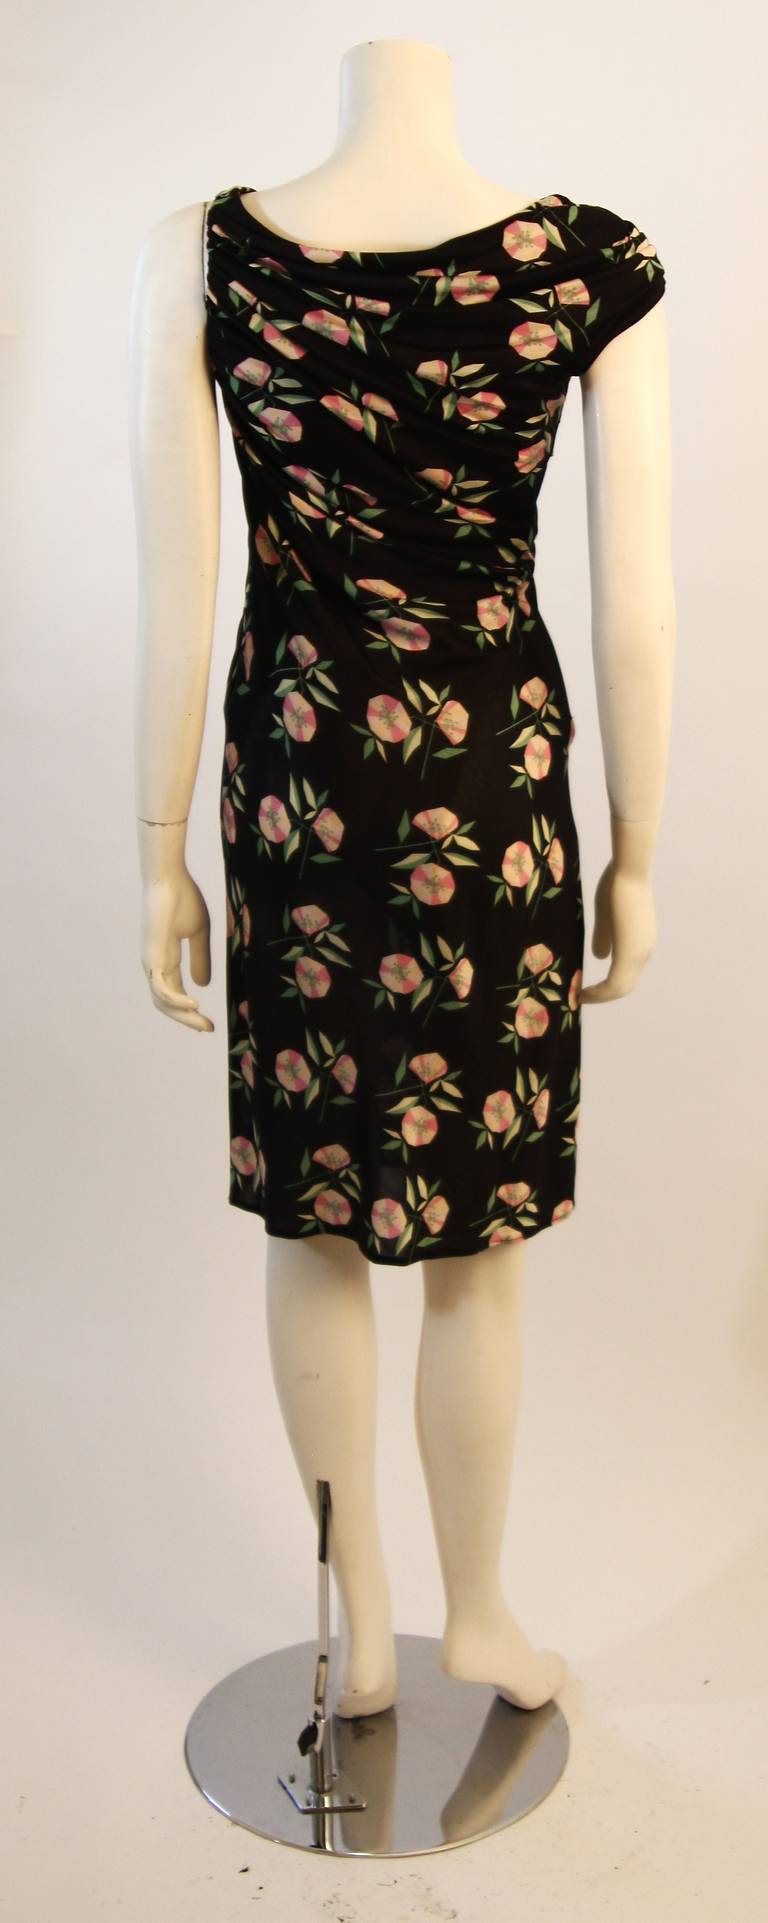 Gianni Versace Black with Pink Roses Ruched Silk Jersey Dress Size 40 For Sale 3